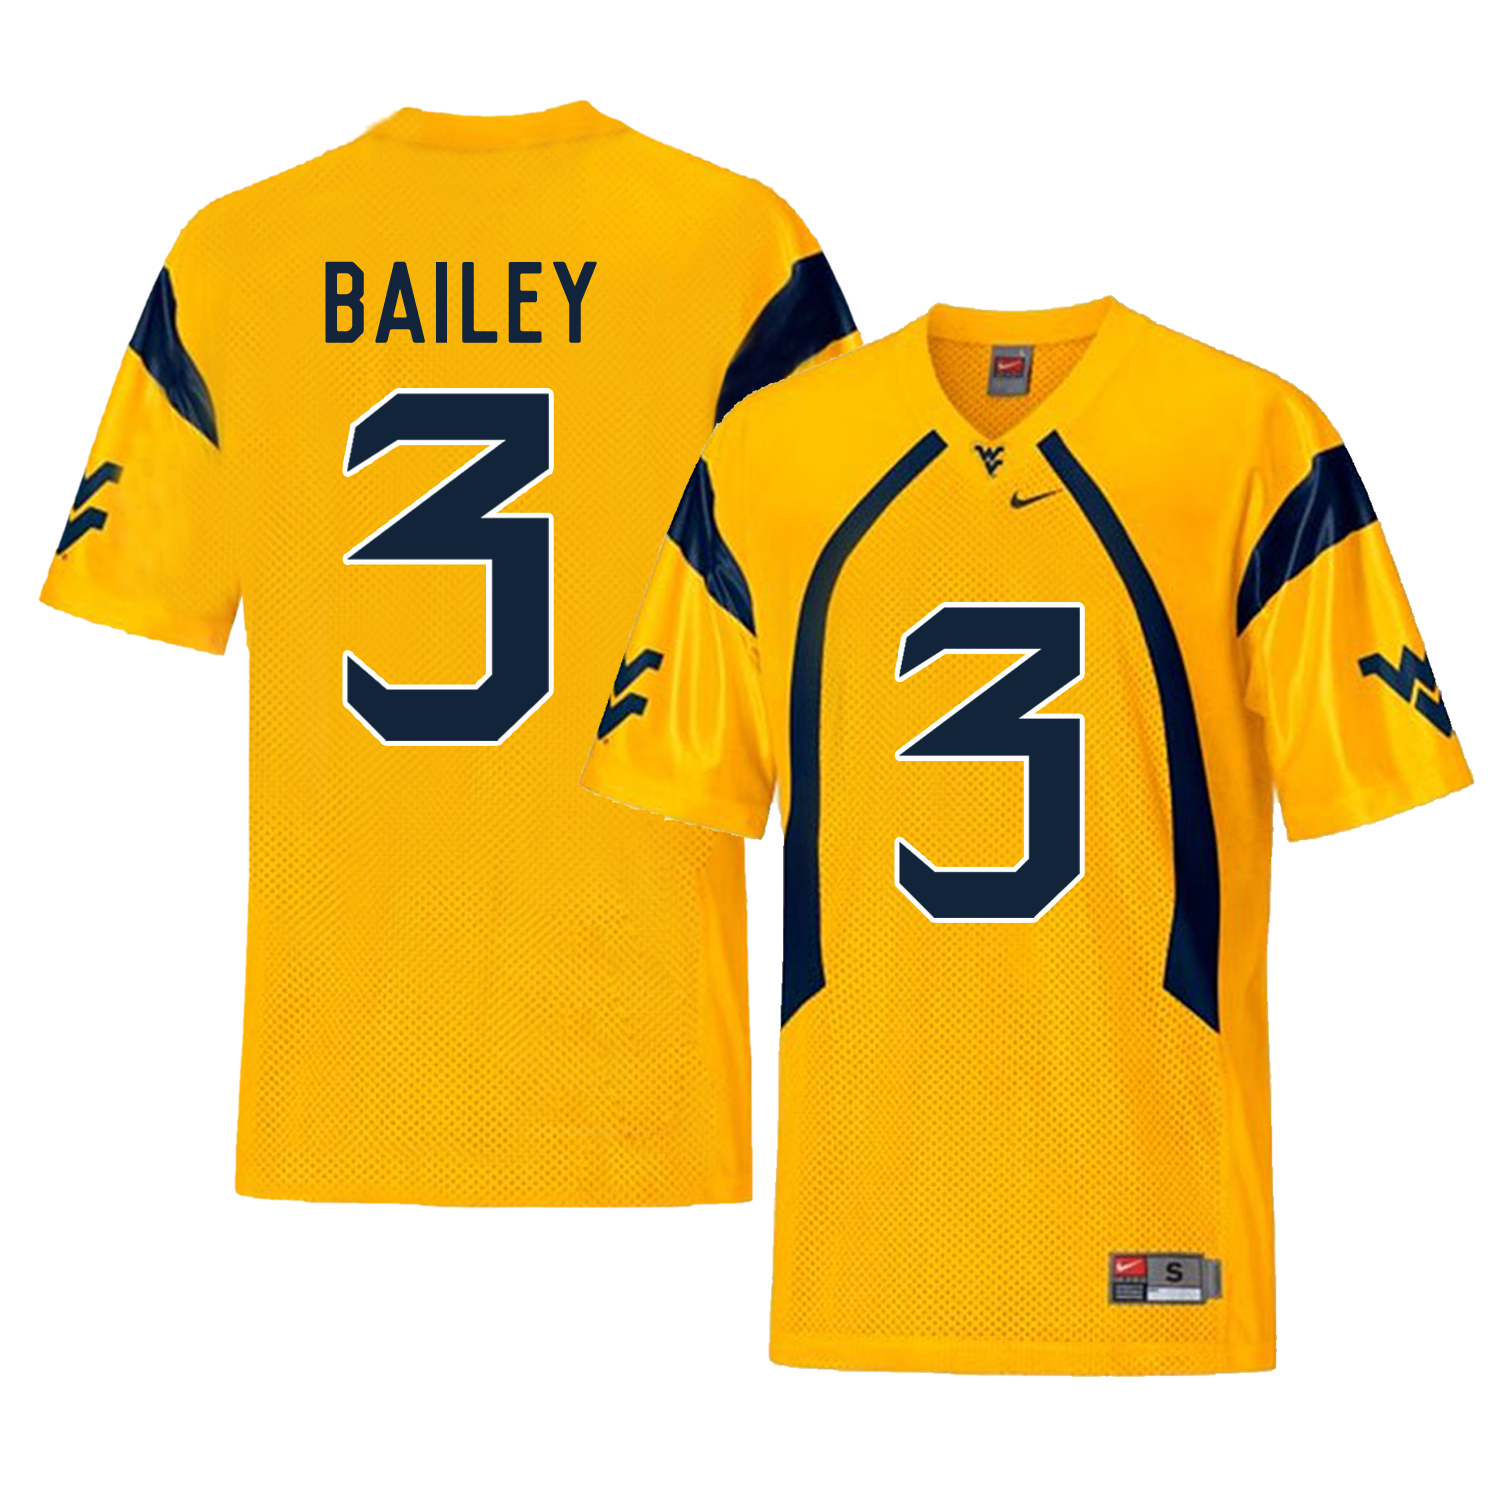 West Virginia Mountaineers 3 Stedman Bailey Gold College Football Jersey